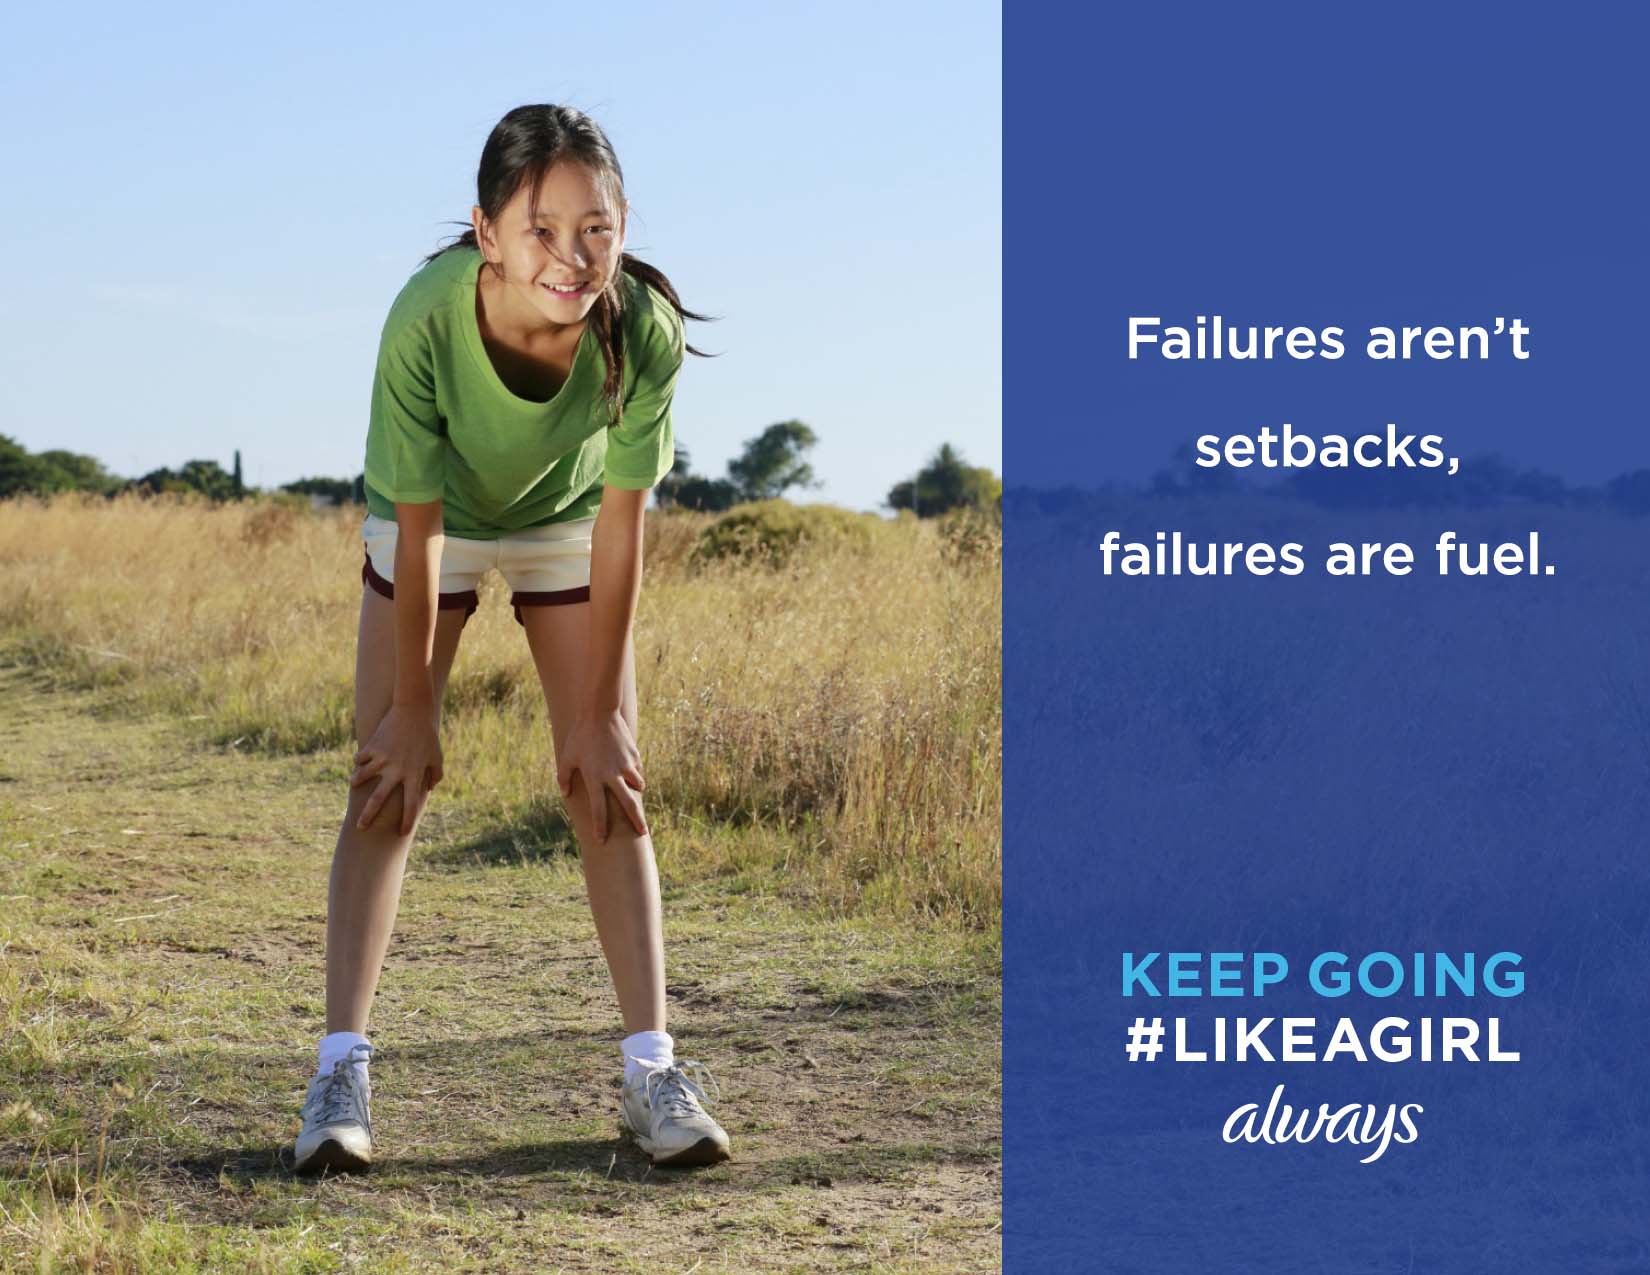 Failure during. Always #LIKEAGIRL. Keeping going, keep going,keep going!. Girl where are going.